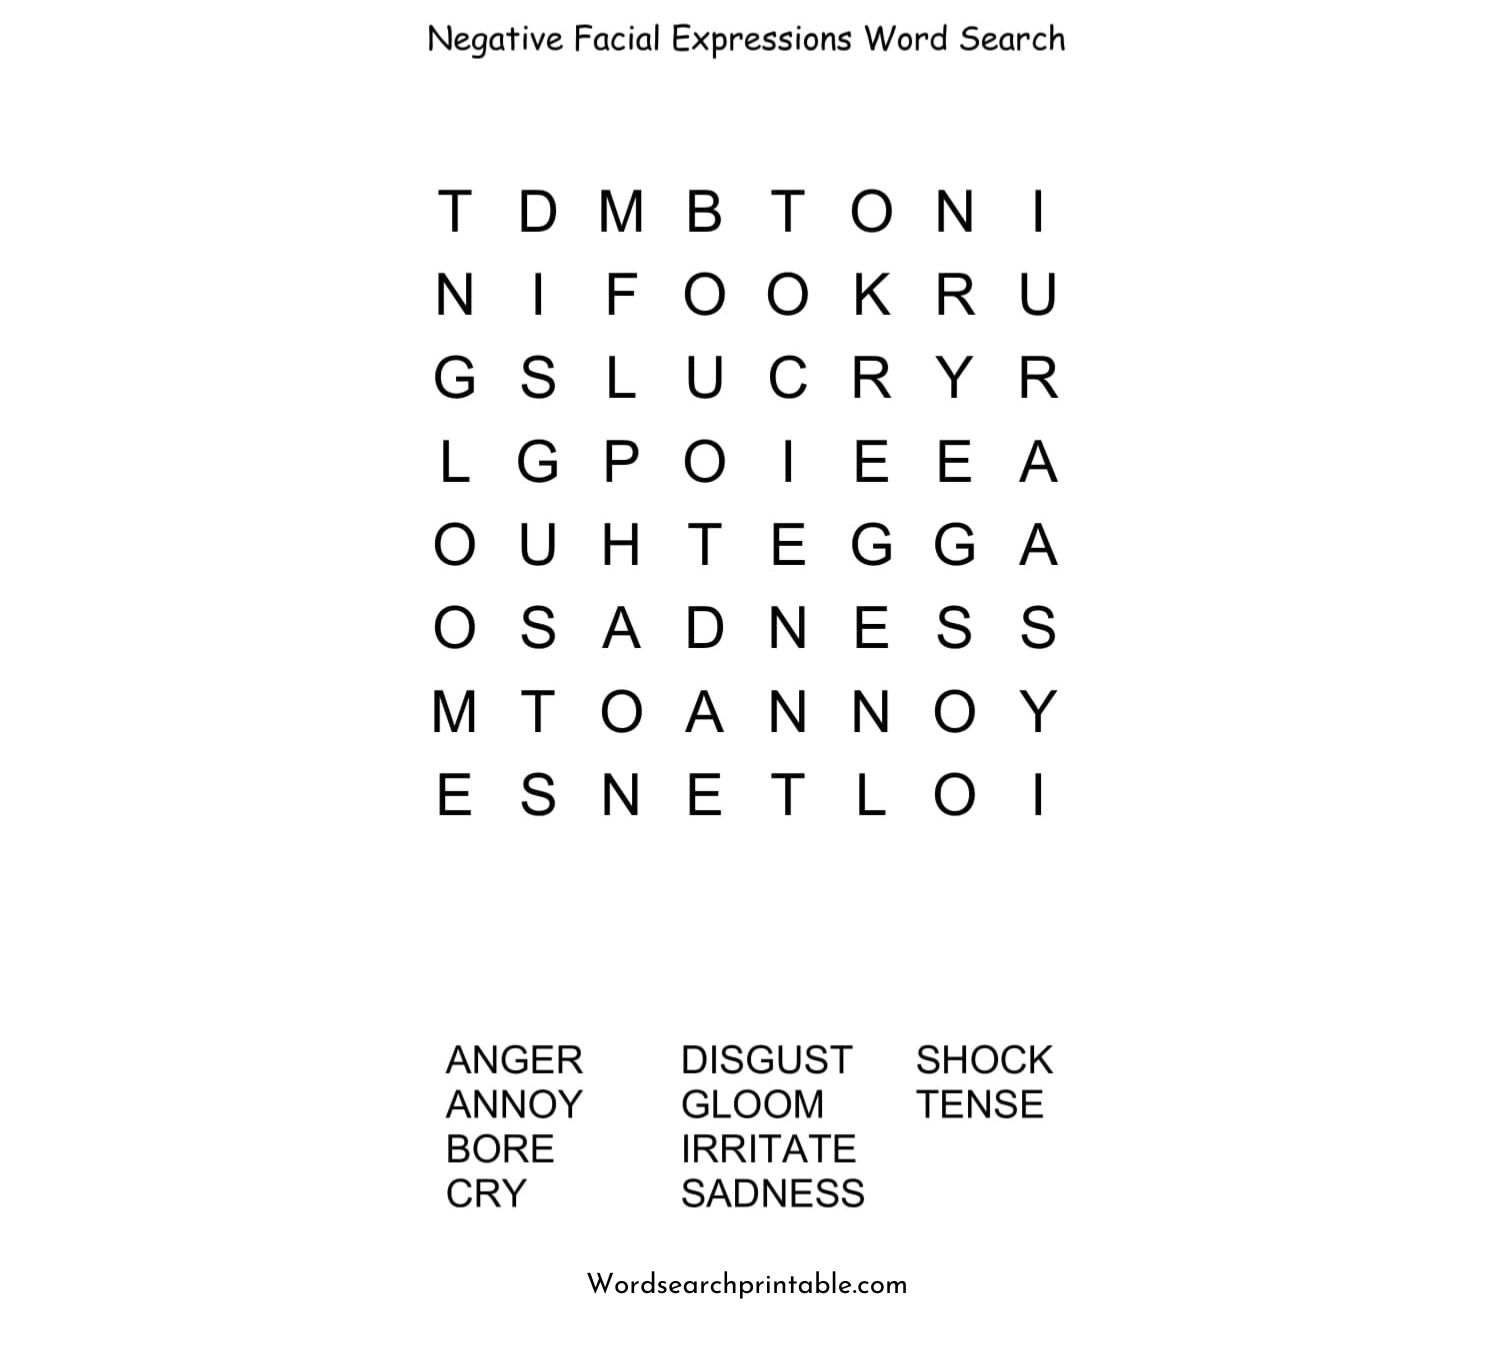 negative facial expressions word search puzzle